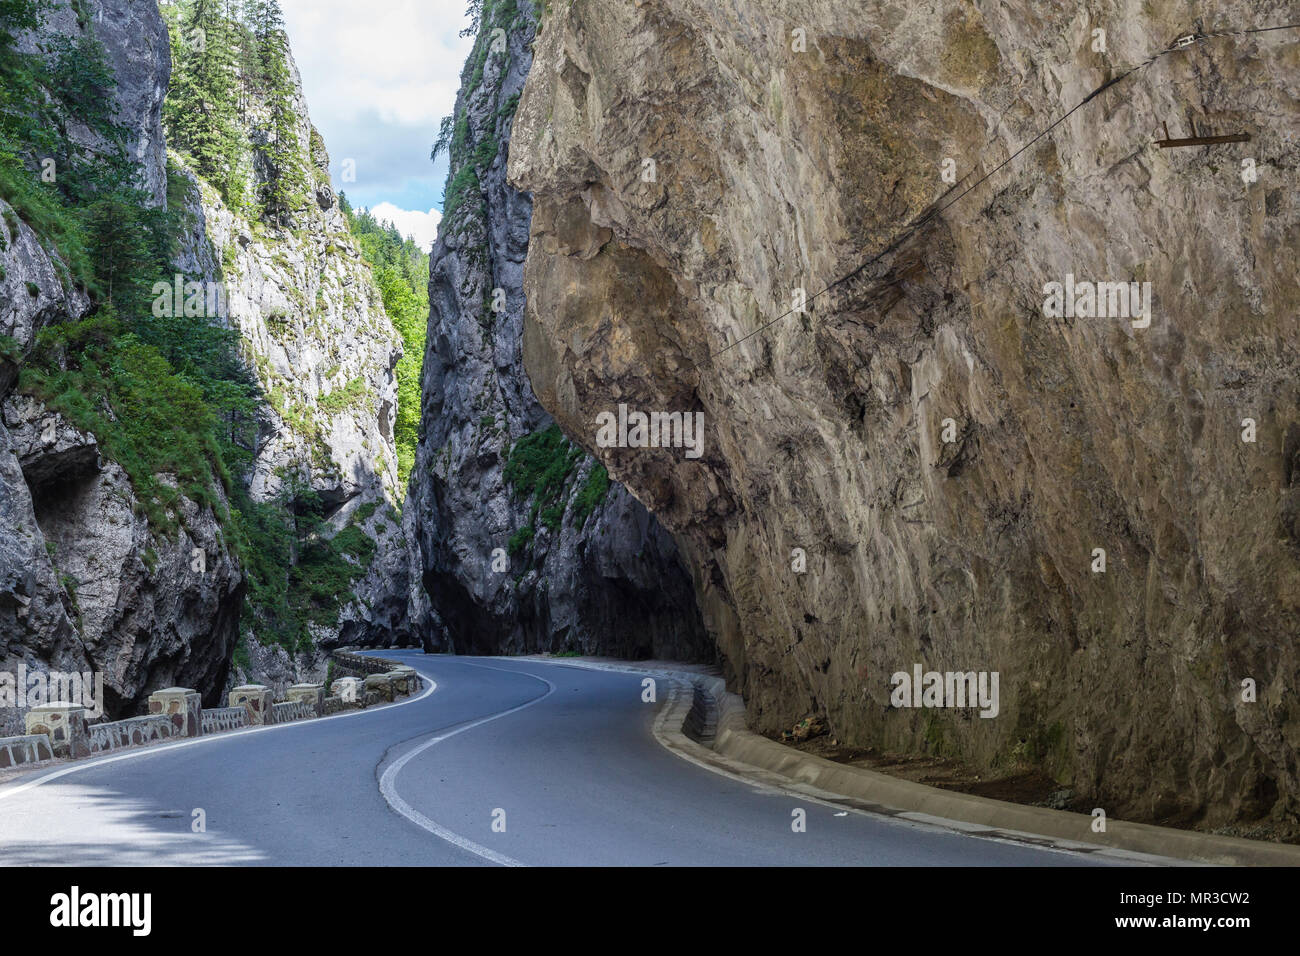 Road In Mountains Bicaz Canyon Is One Of The Most Spectacular Roads In Romania Carpathian Mountains Cheile Bicazului Romania Stock Photo Alamy